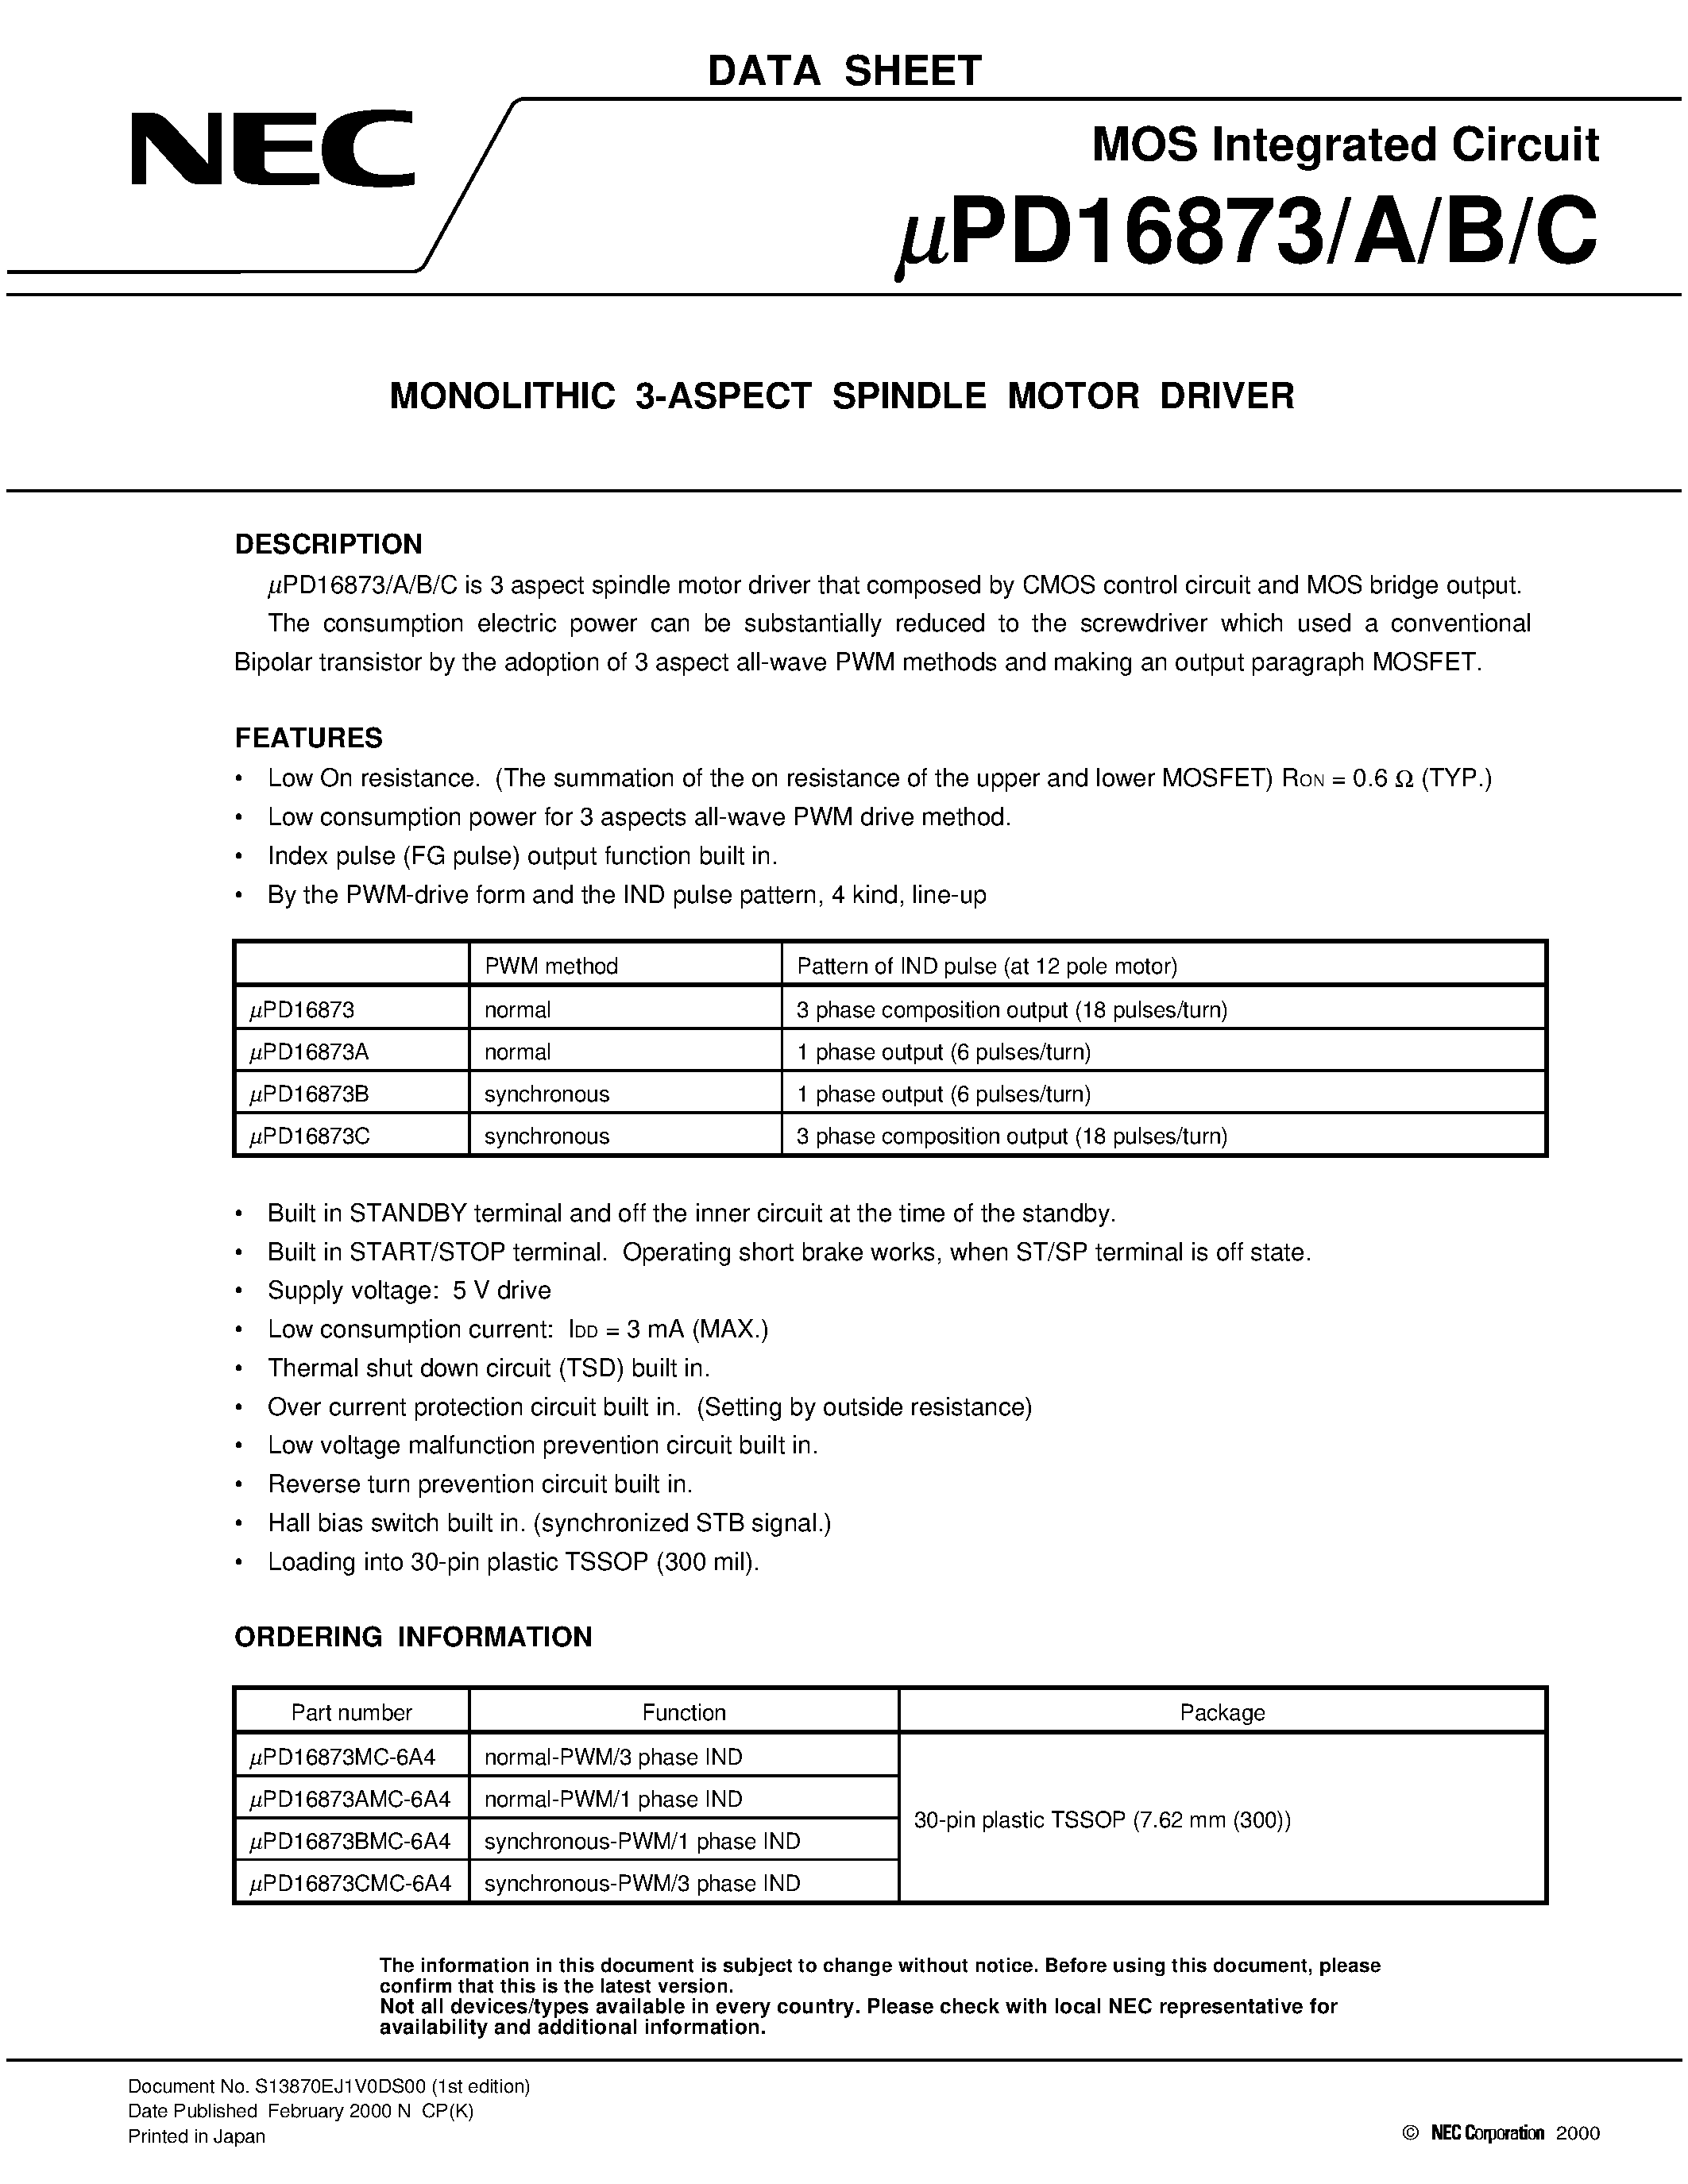 Datasheet UPD16873AMC-6A4 - MONOLITHIC 3-ASPECT SPINDLE MOTOR DRIVER page 1